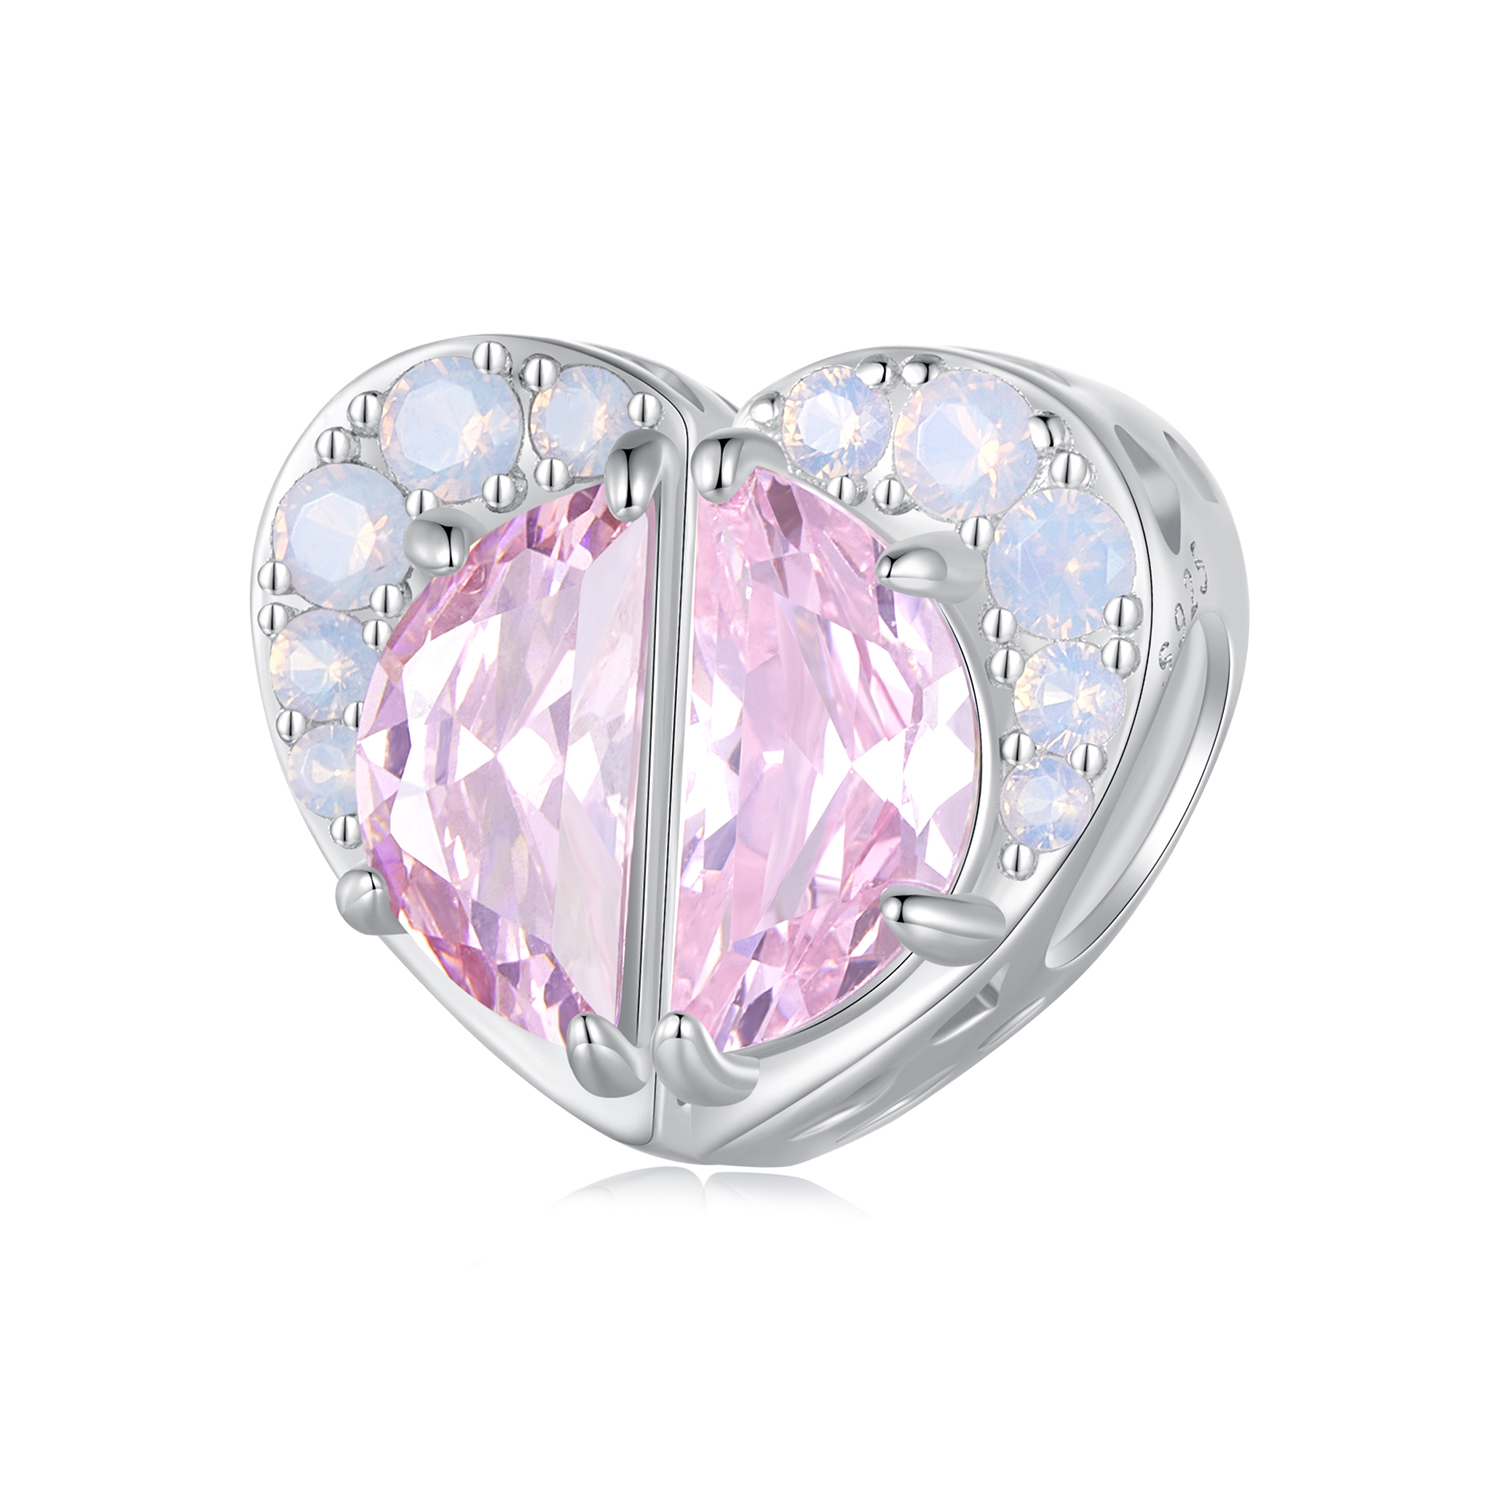 pink sisters heart charm in pandora style scc2641